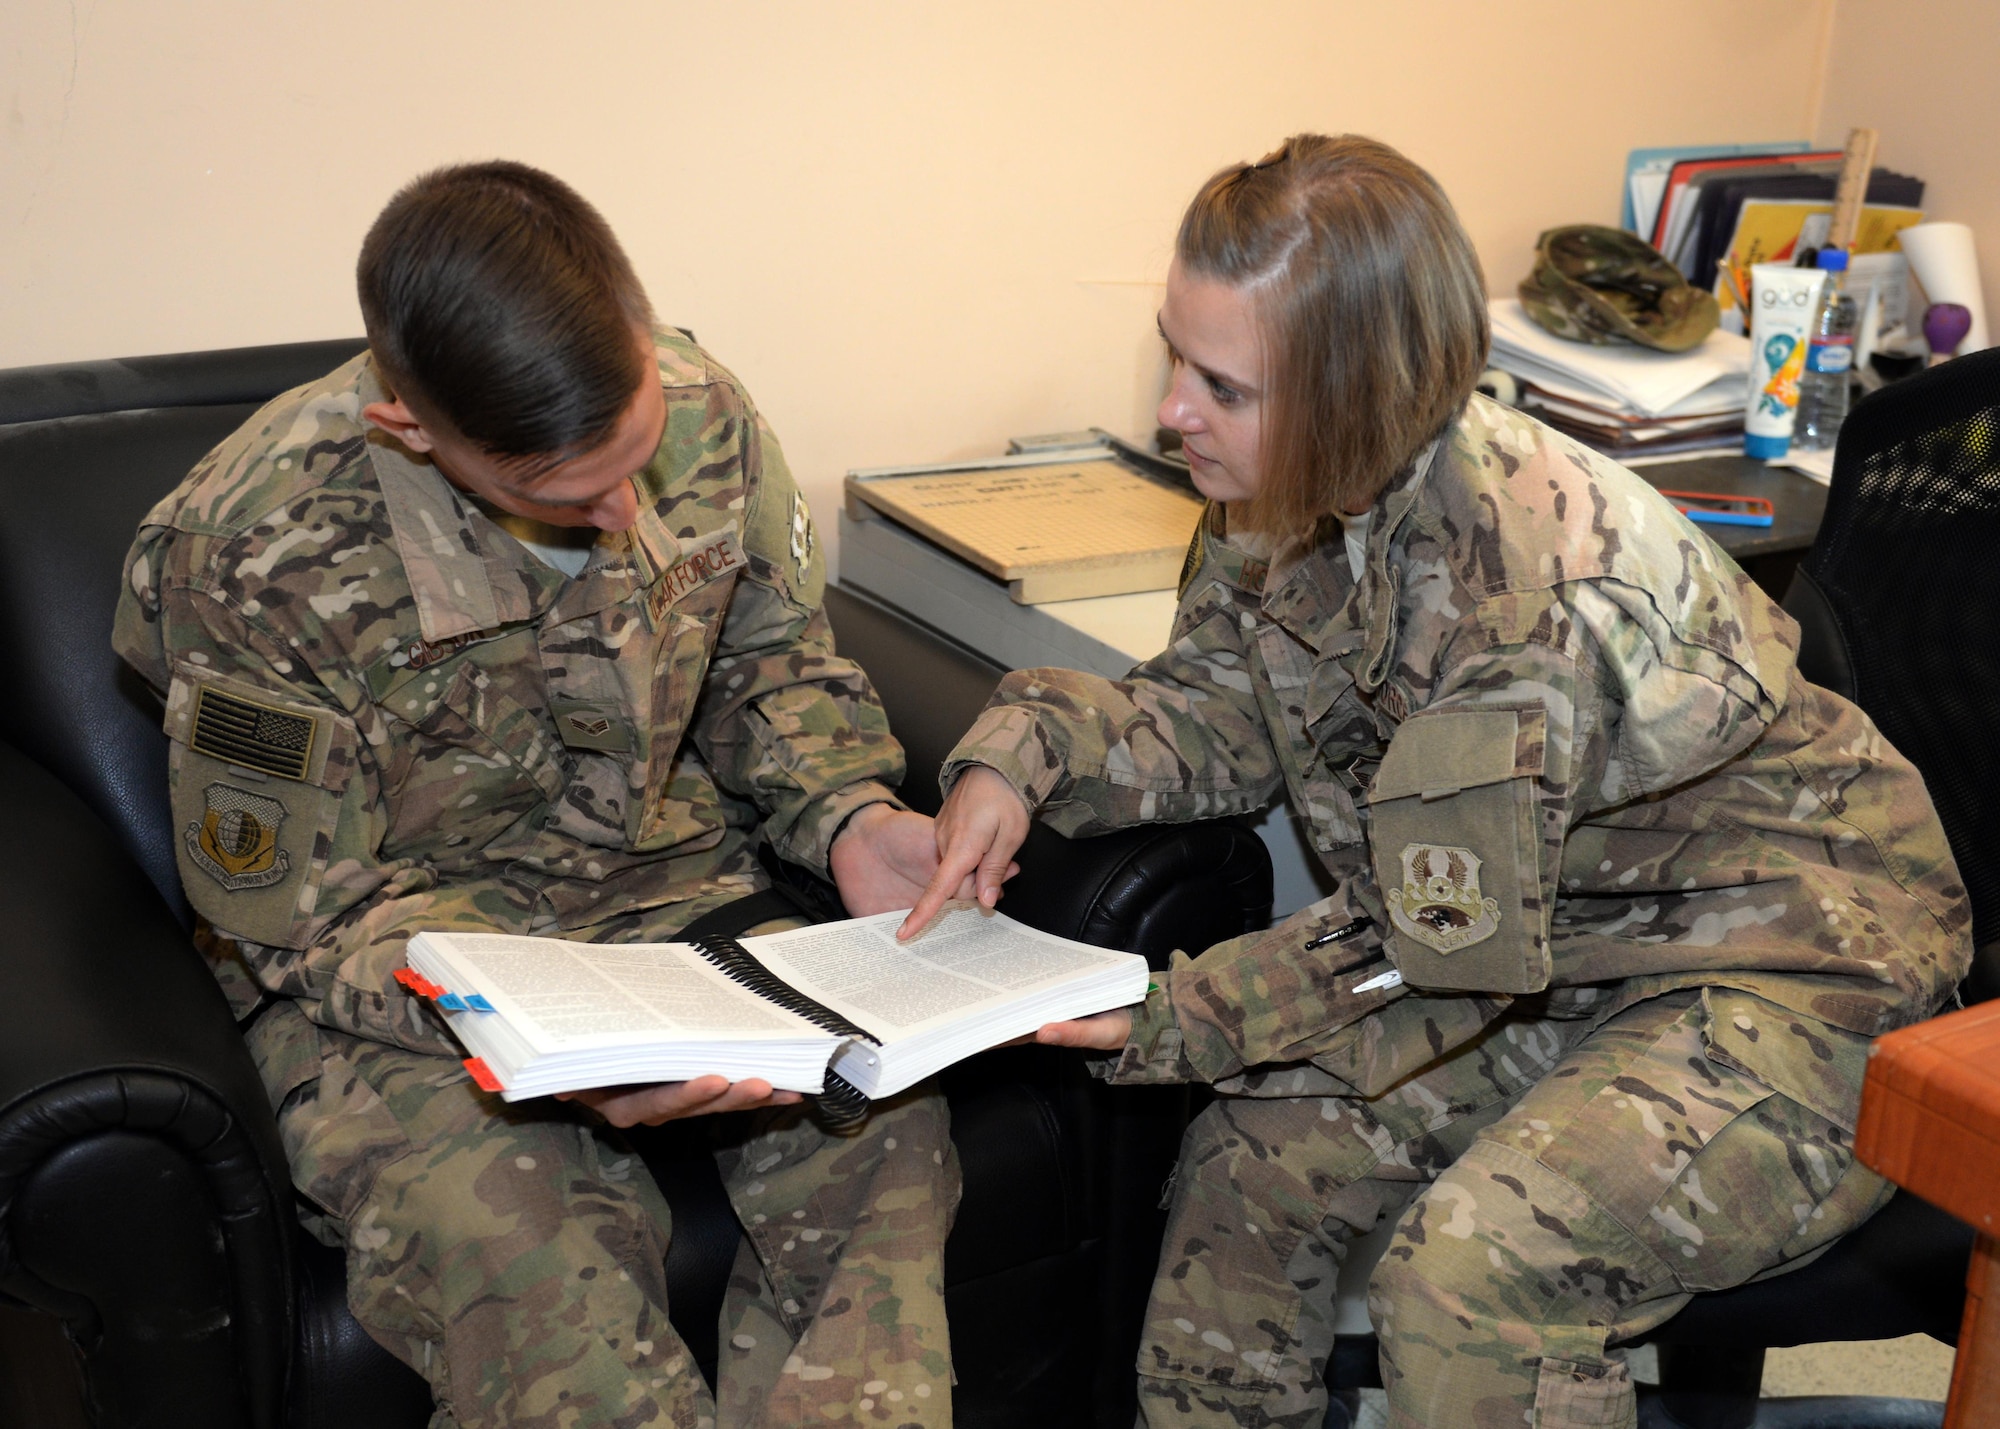 U.S. Air Force Master Sgt. Natasha Hoglund, 455th Air Expeditionary Wing Legal Office superintendent, helps Senior Airman Cory Gibson, 455th AEW Finance Office customer service technician with legal assistance July 18, 2015, at Bagram Airfield, Afghanistan. The legal office is here to help military members with legal issues they may be dealing with at home and here in the AOR. (U.S. Air Force photo by Senior Airman Cierra Presentado/Released)